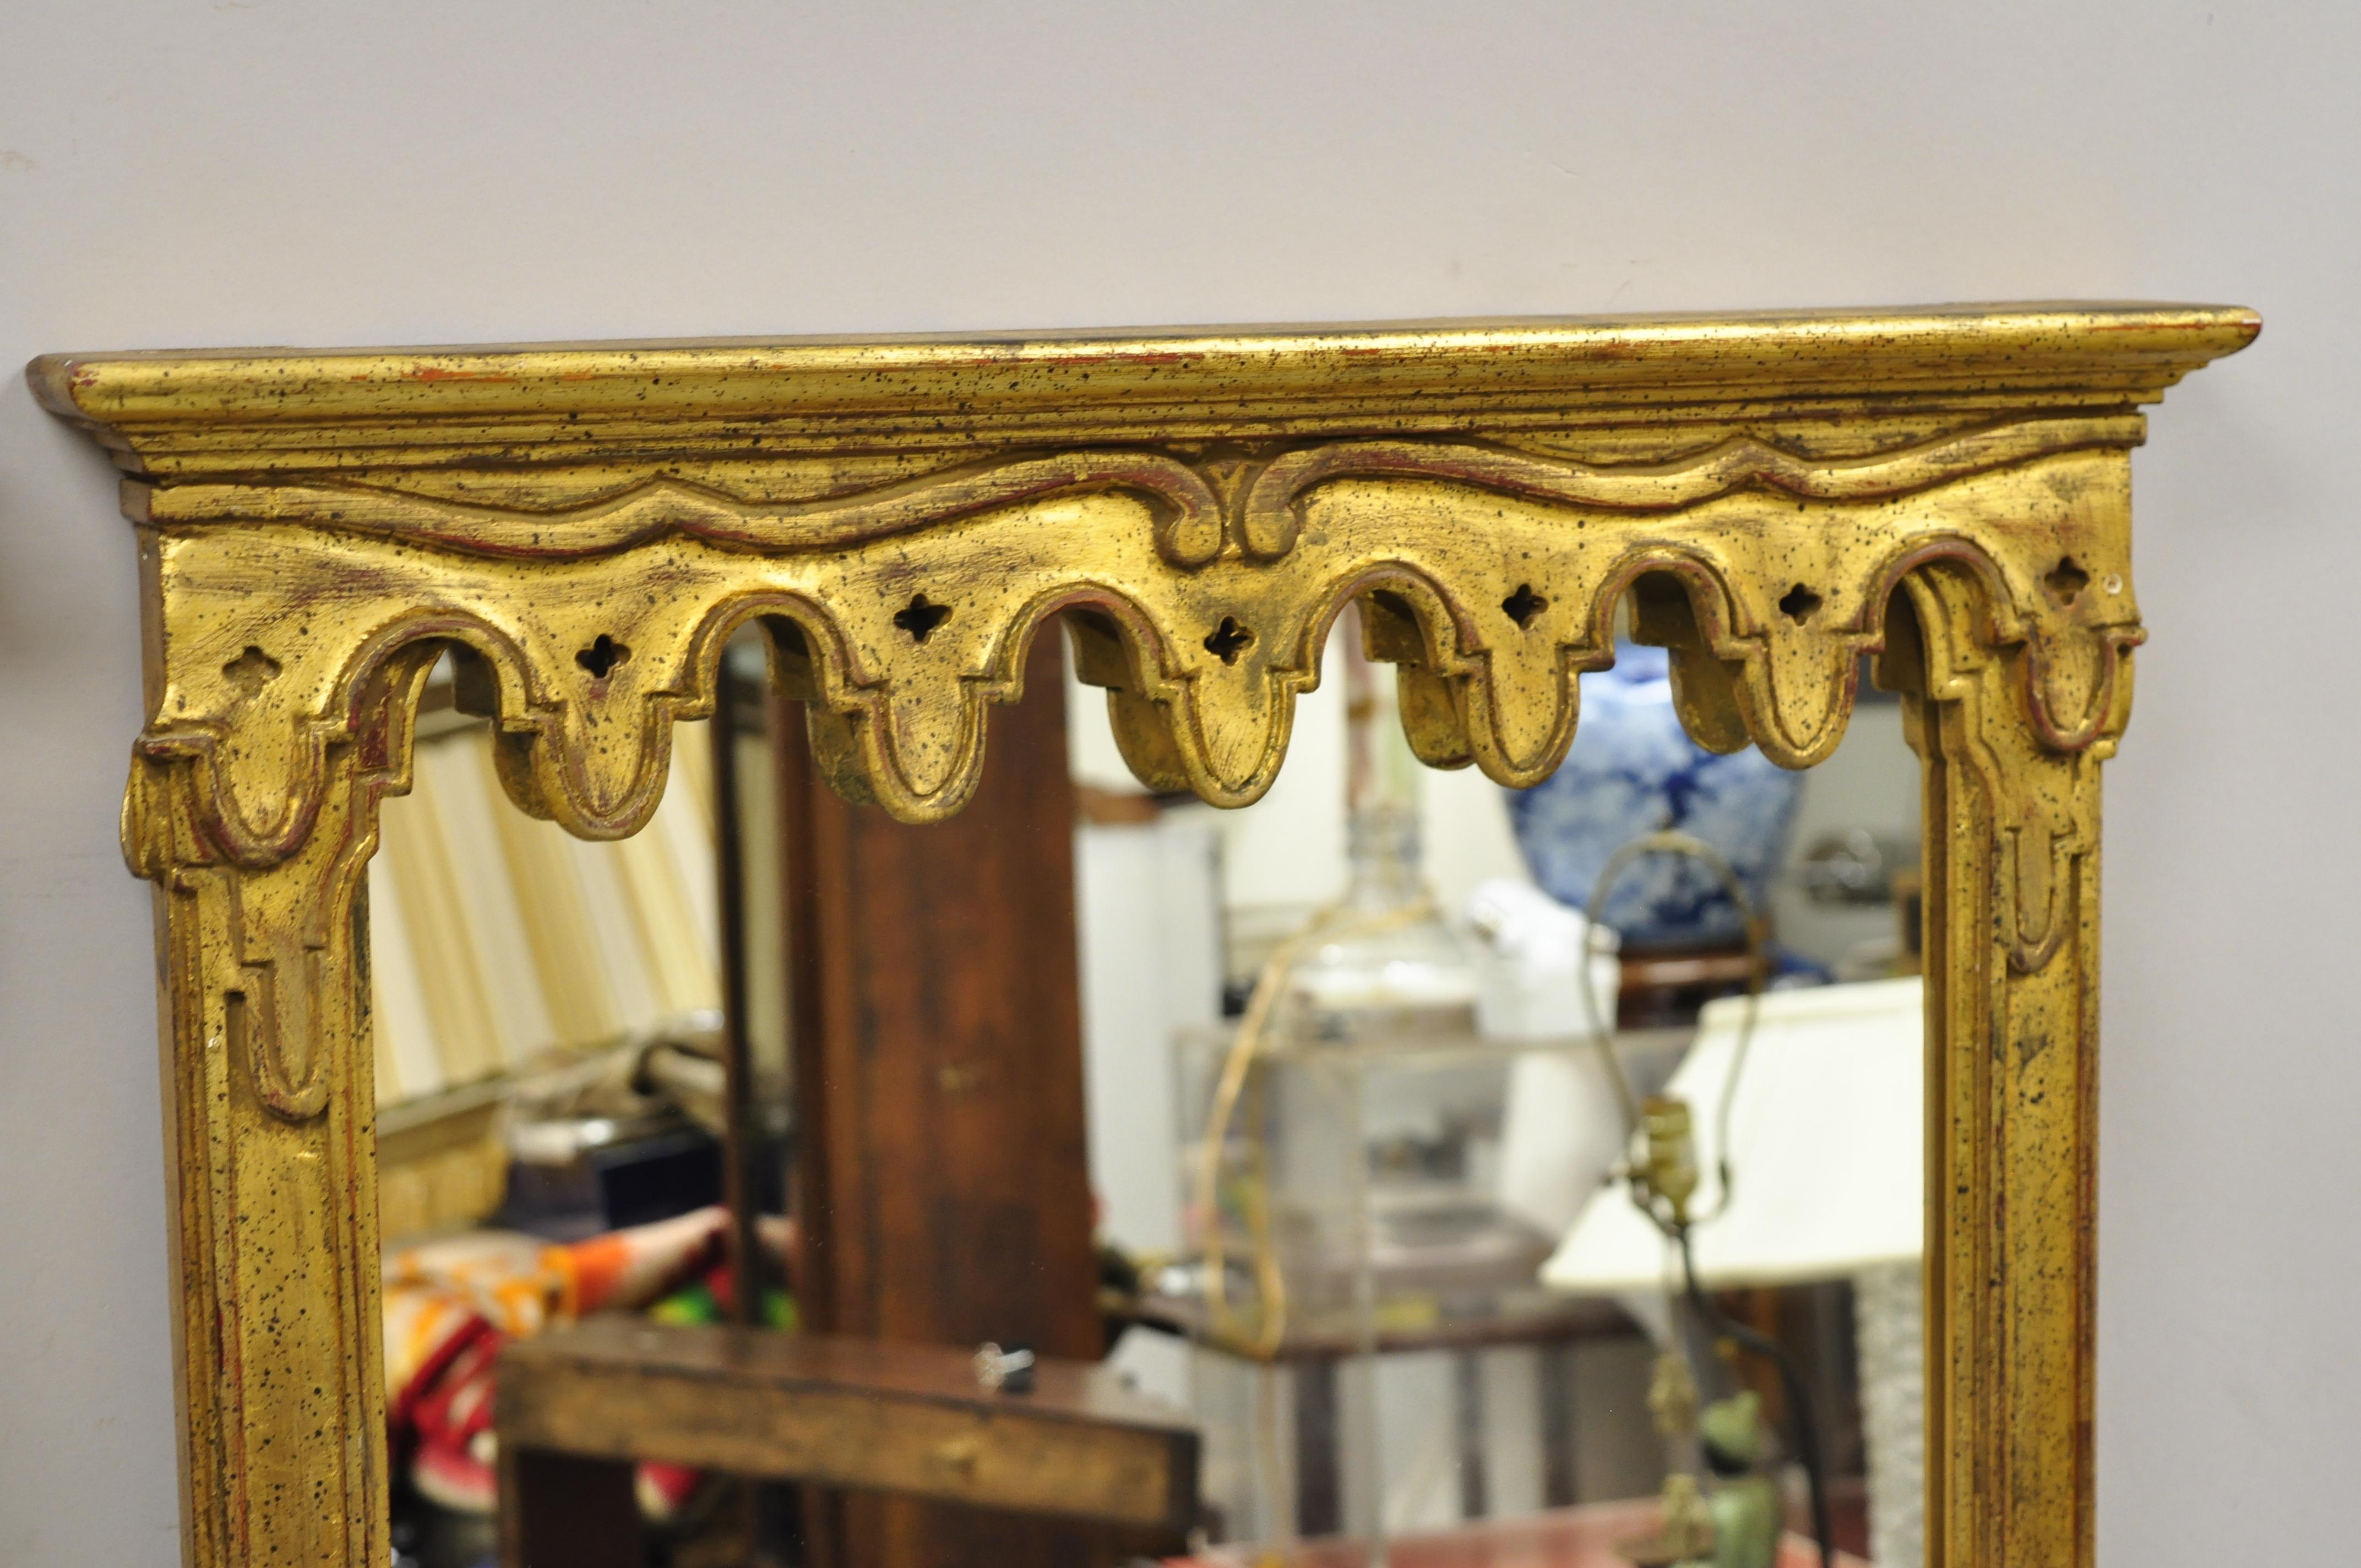 Vintage Italian Hollywood Regency gold giltwood trumeau hall wall mirrors - a pair. Item features carved giltwood frames with drape pediment, distressed finish, nicely carved details, original label, very nice vintage pair, quality Italian